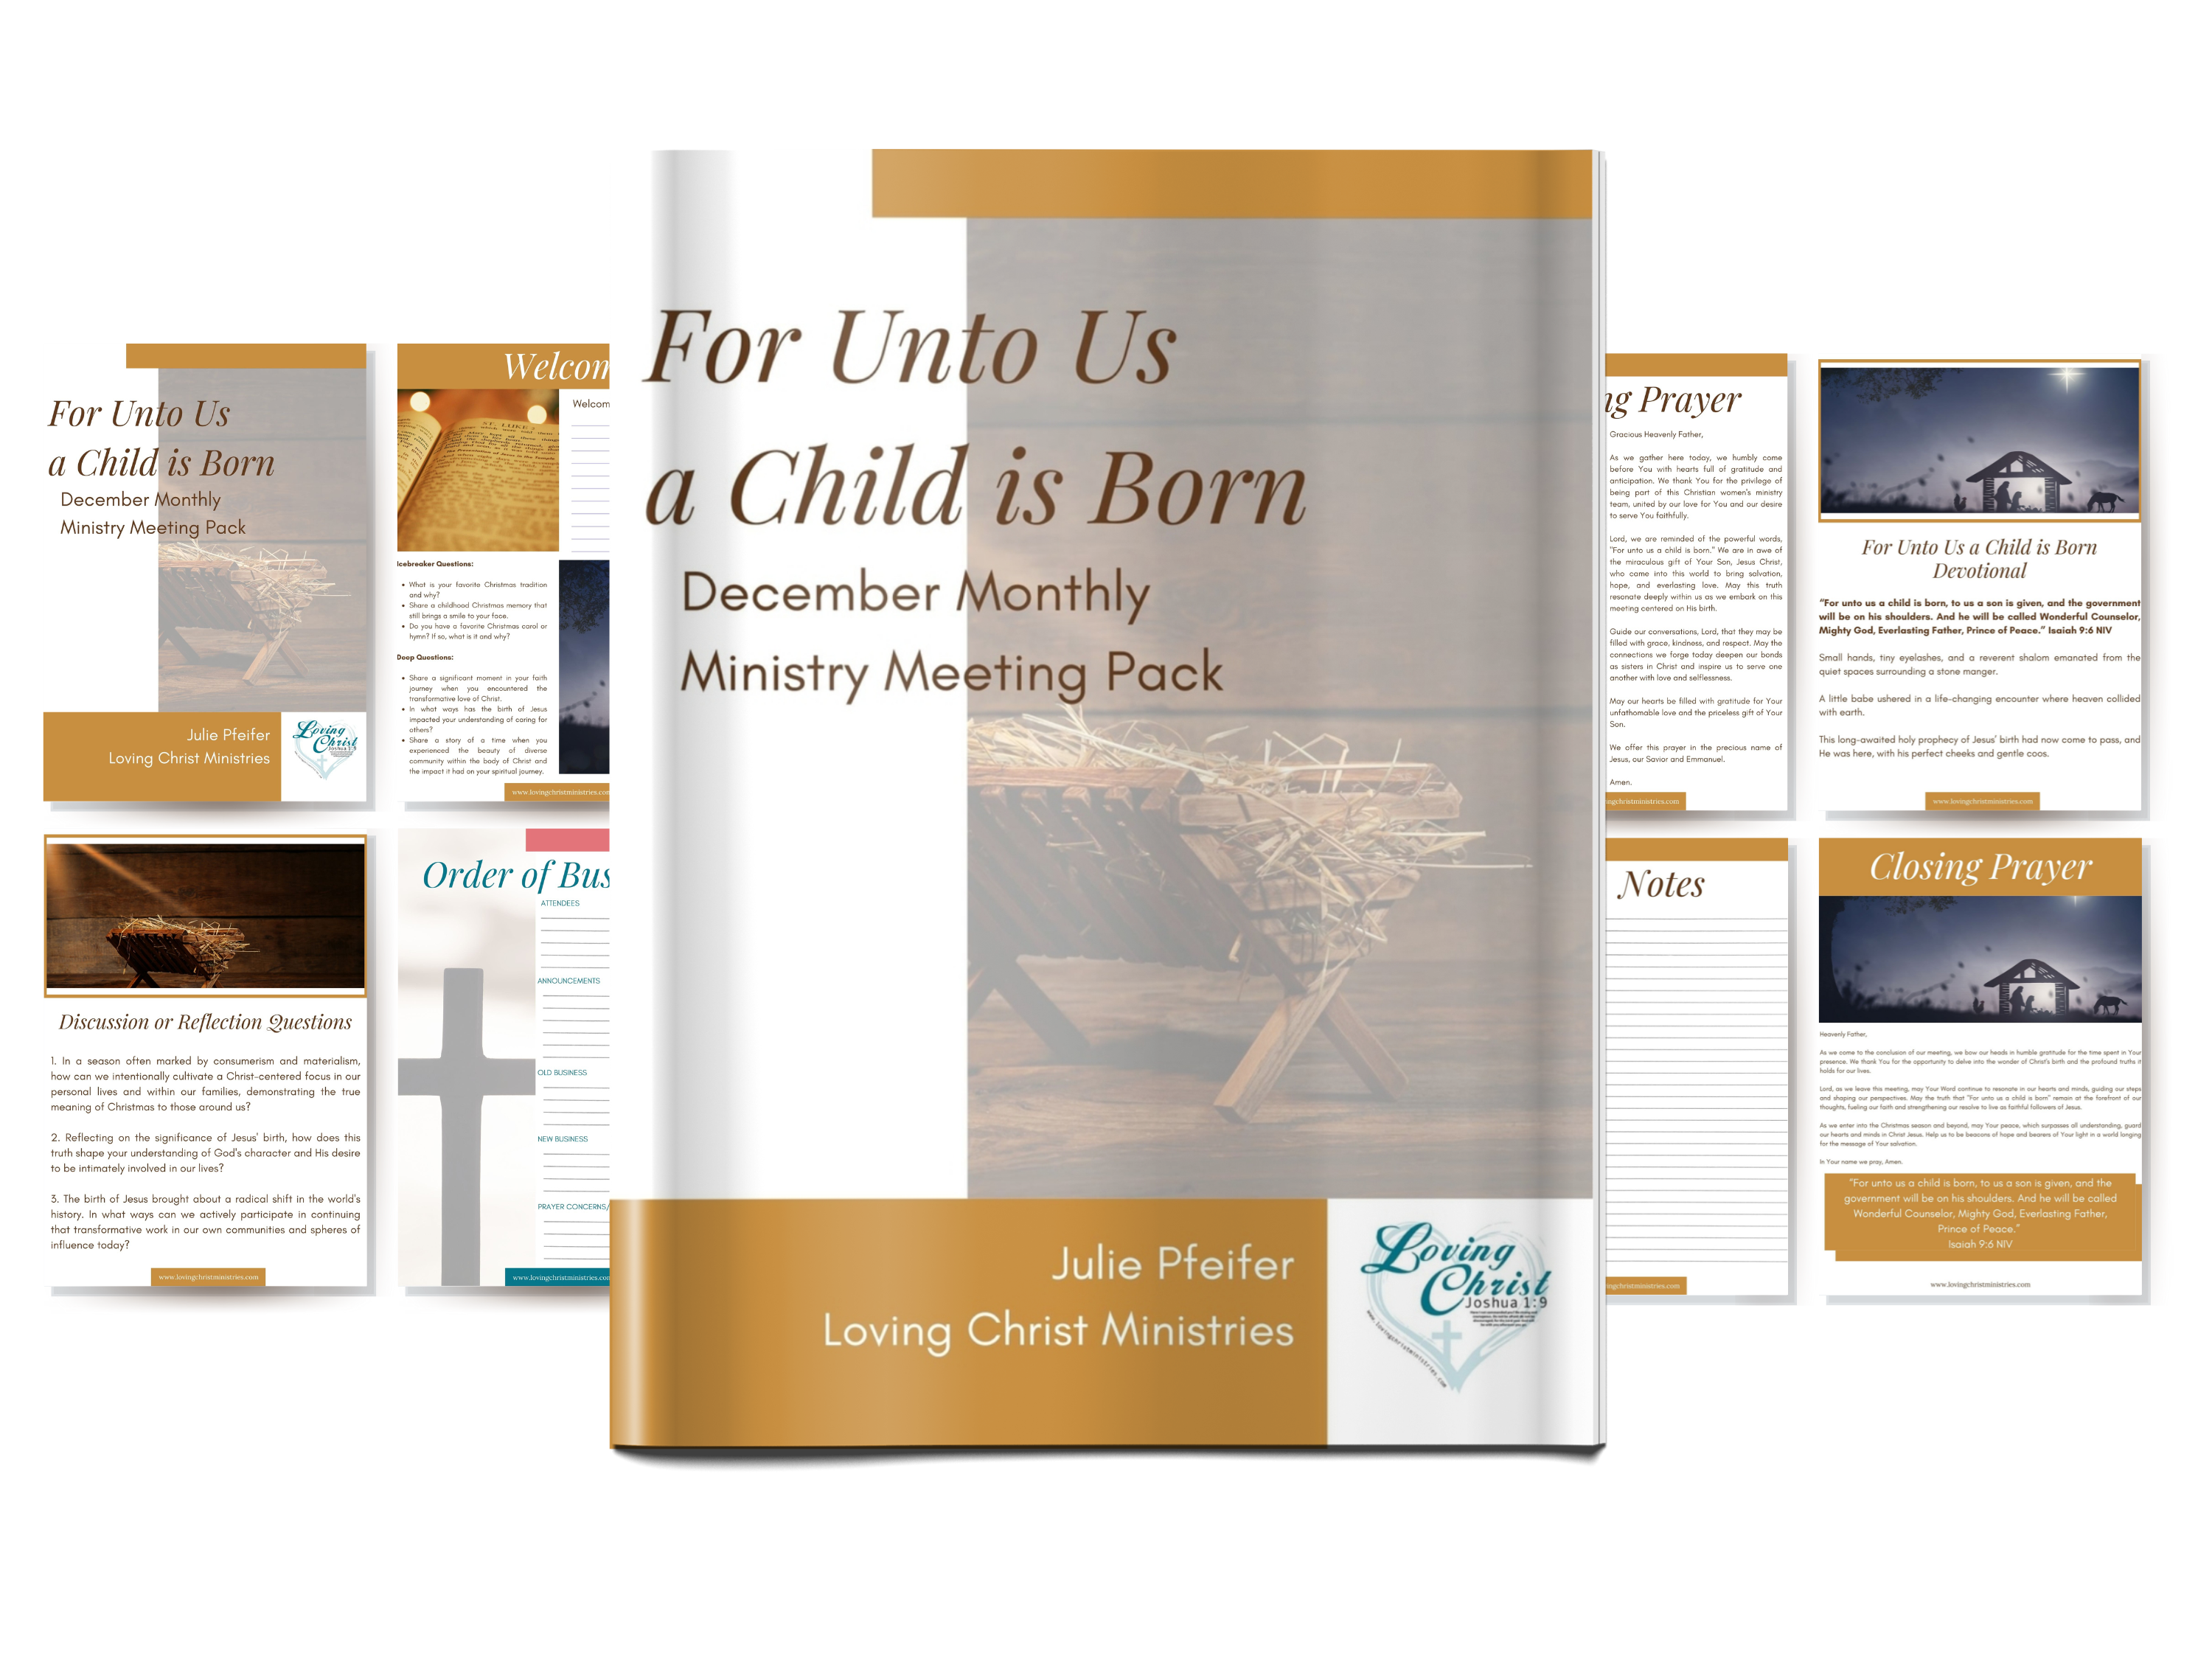 For Unto Us, a Child is Born - December Monthly Ministry Meeting Pack